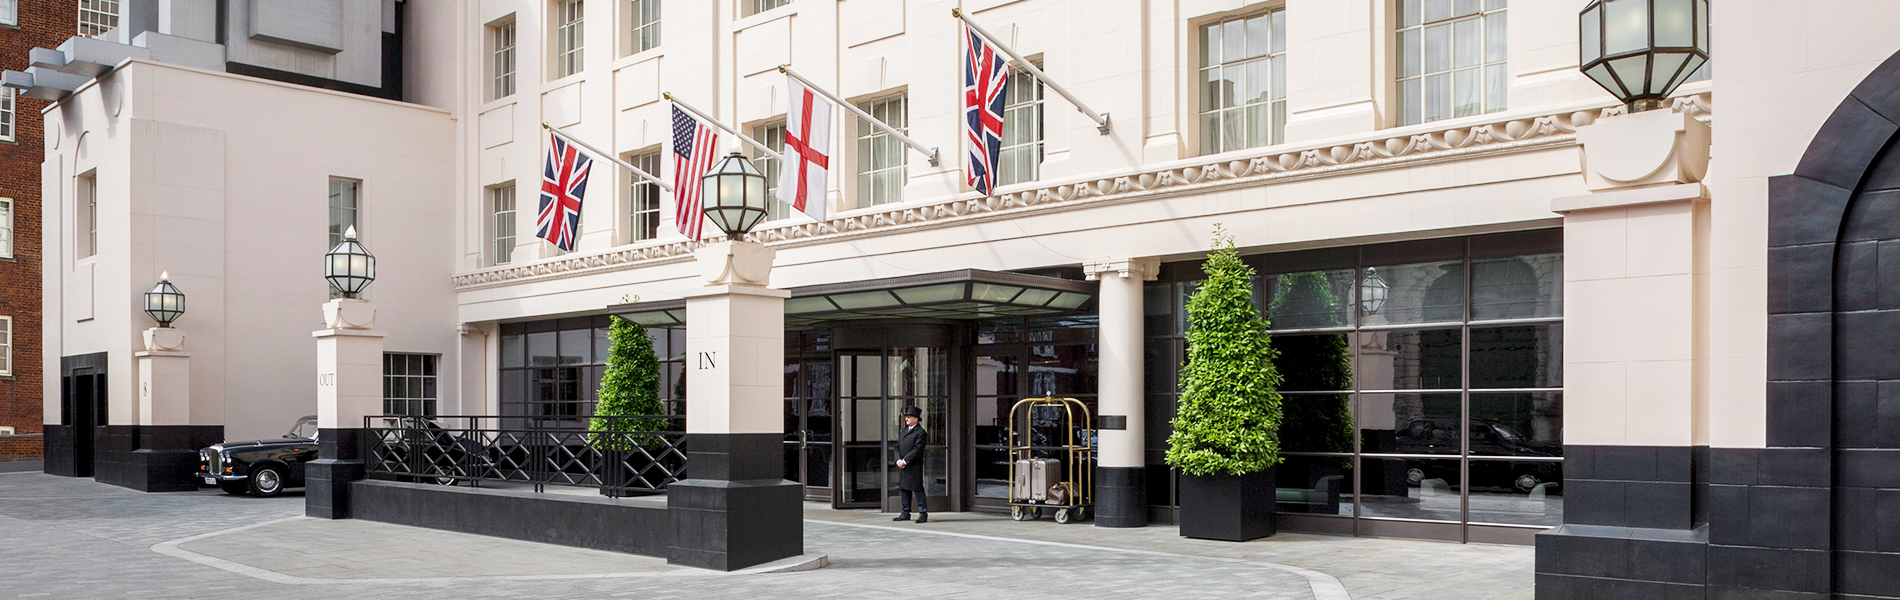 The Beaumont Hotel Entrance